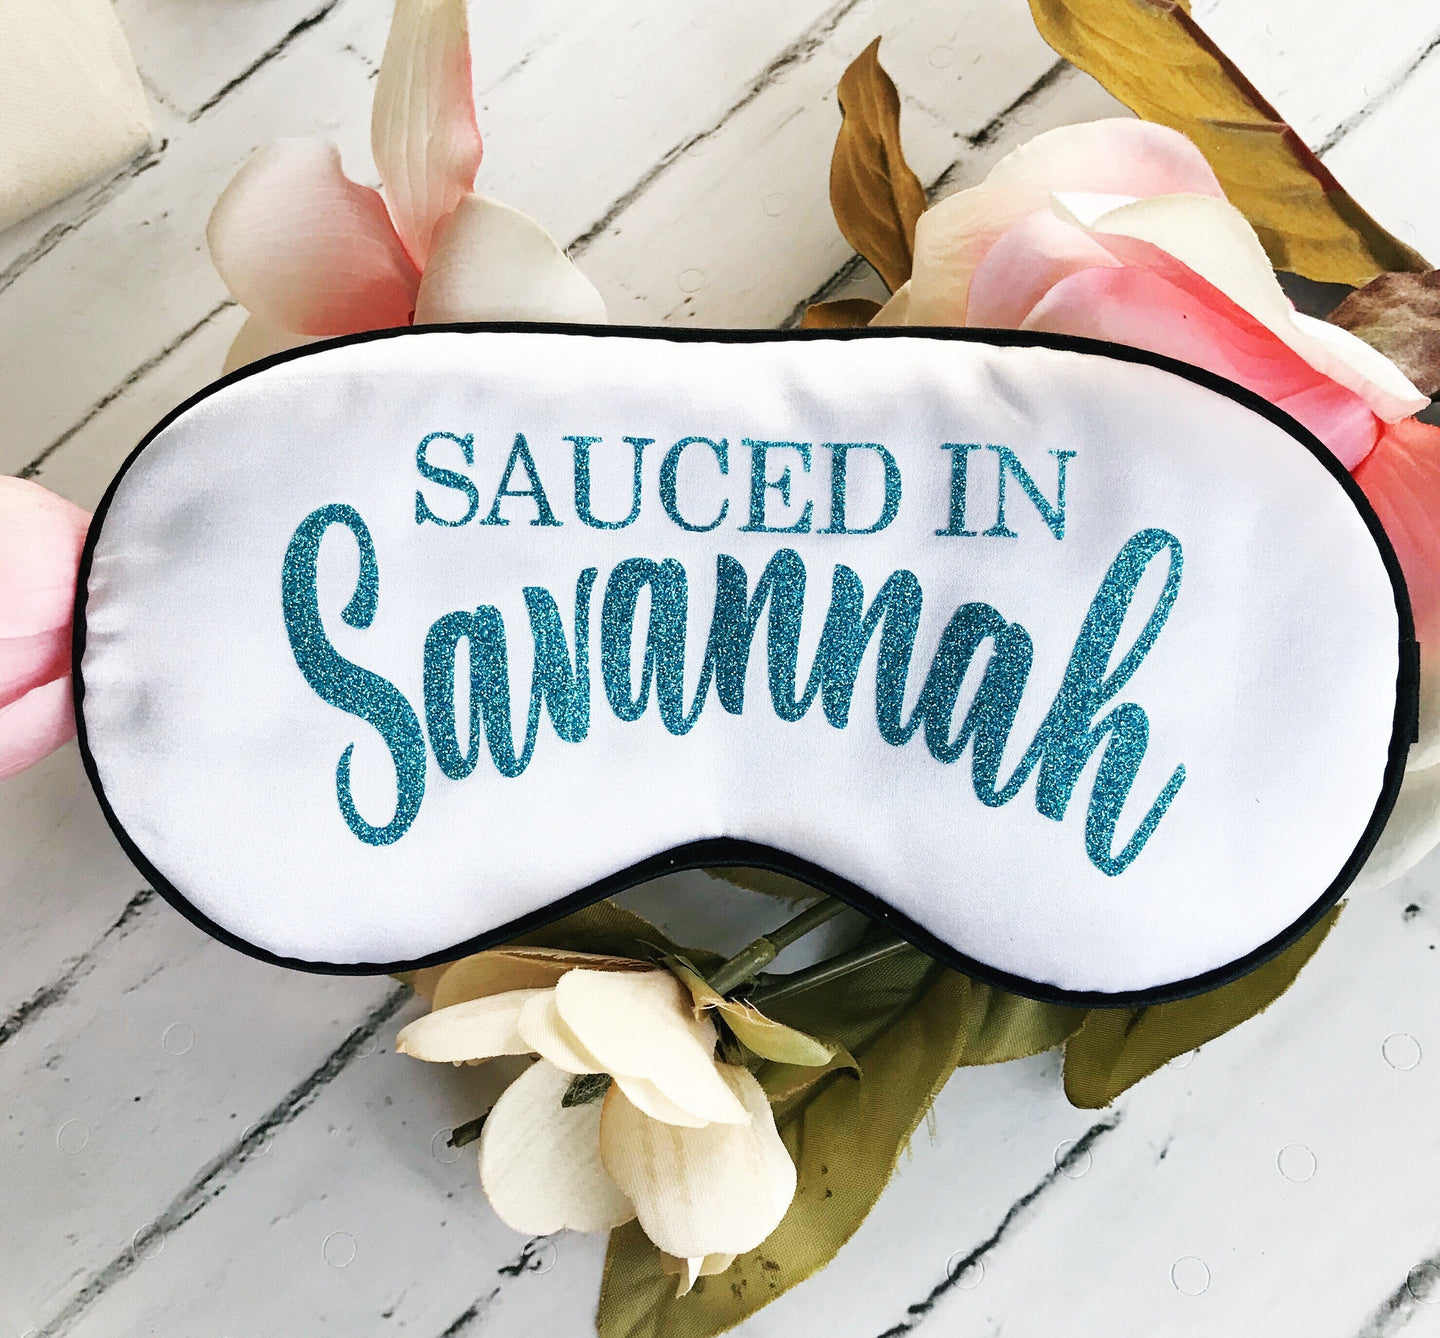 Savannah Sleep Mask! Great Savannah Bachelorette or Birthday party FAVORS. Savannah Party Favors! Perfect addition to the hangover bags!